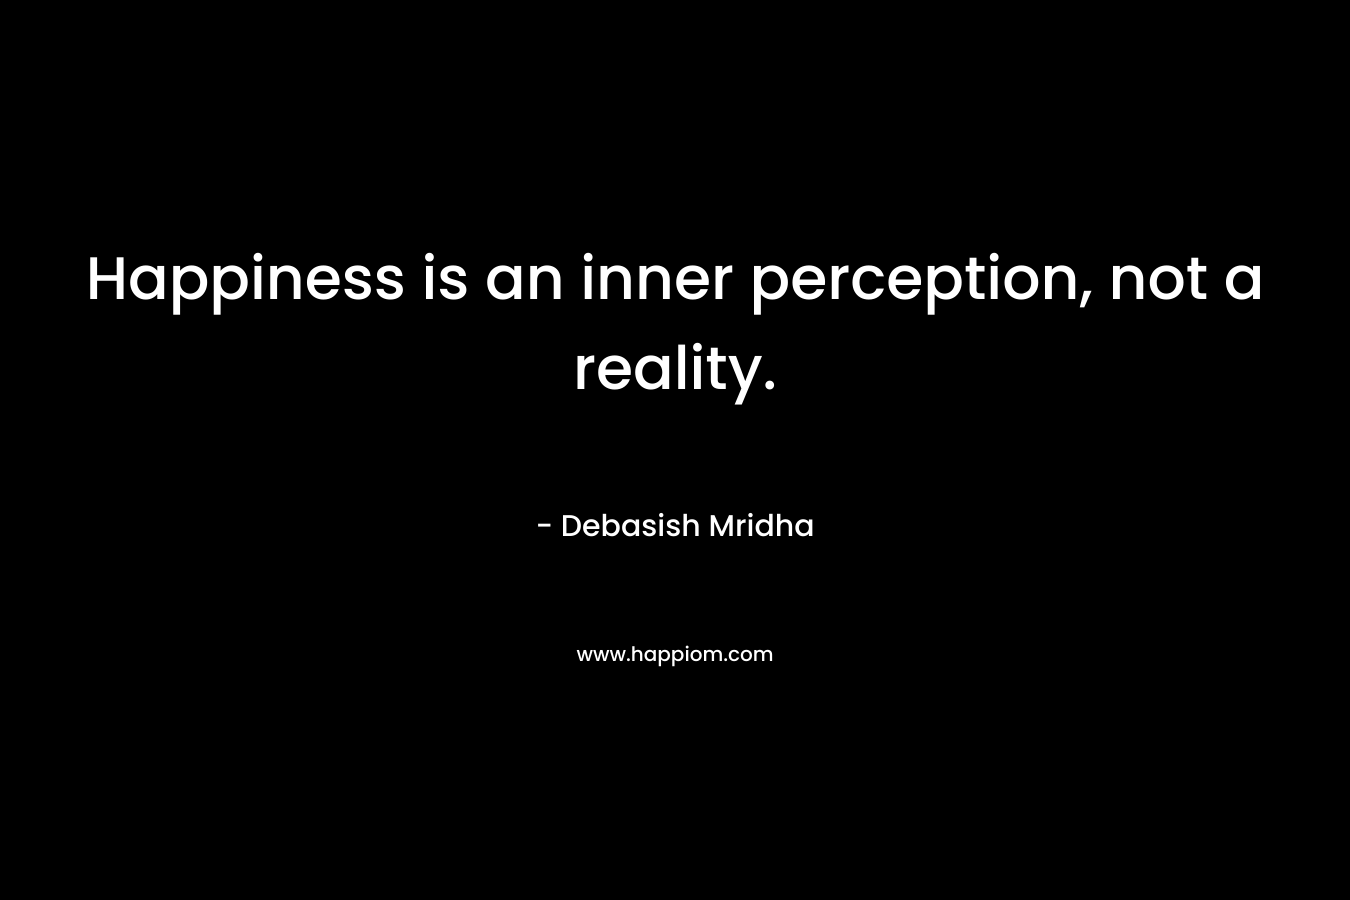 Happiness is an inner perception, not a reality.